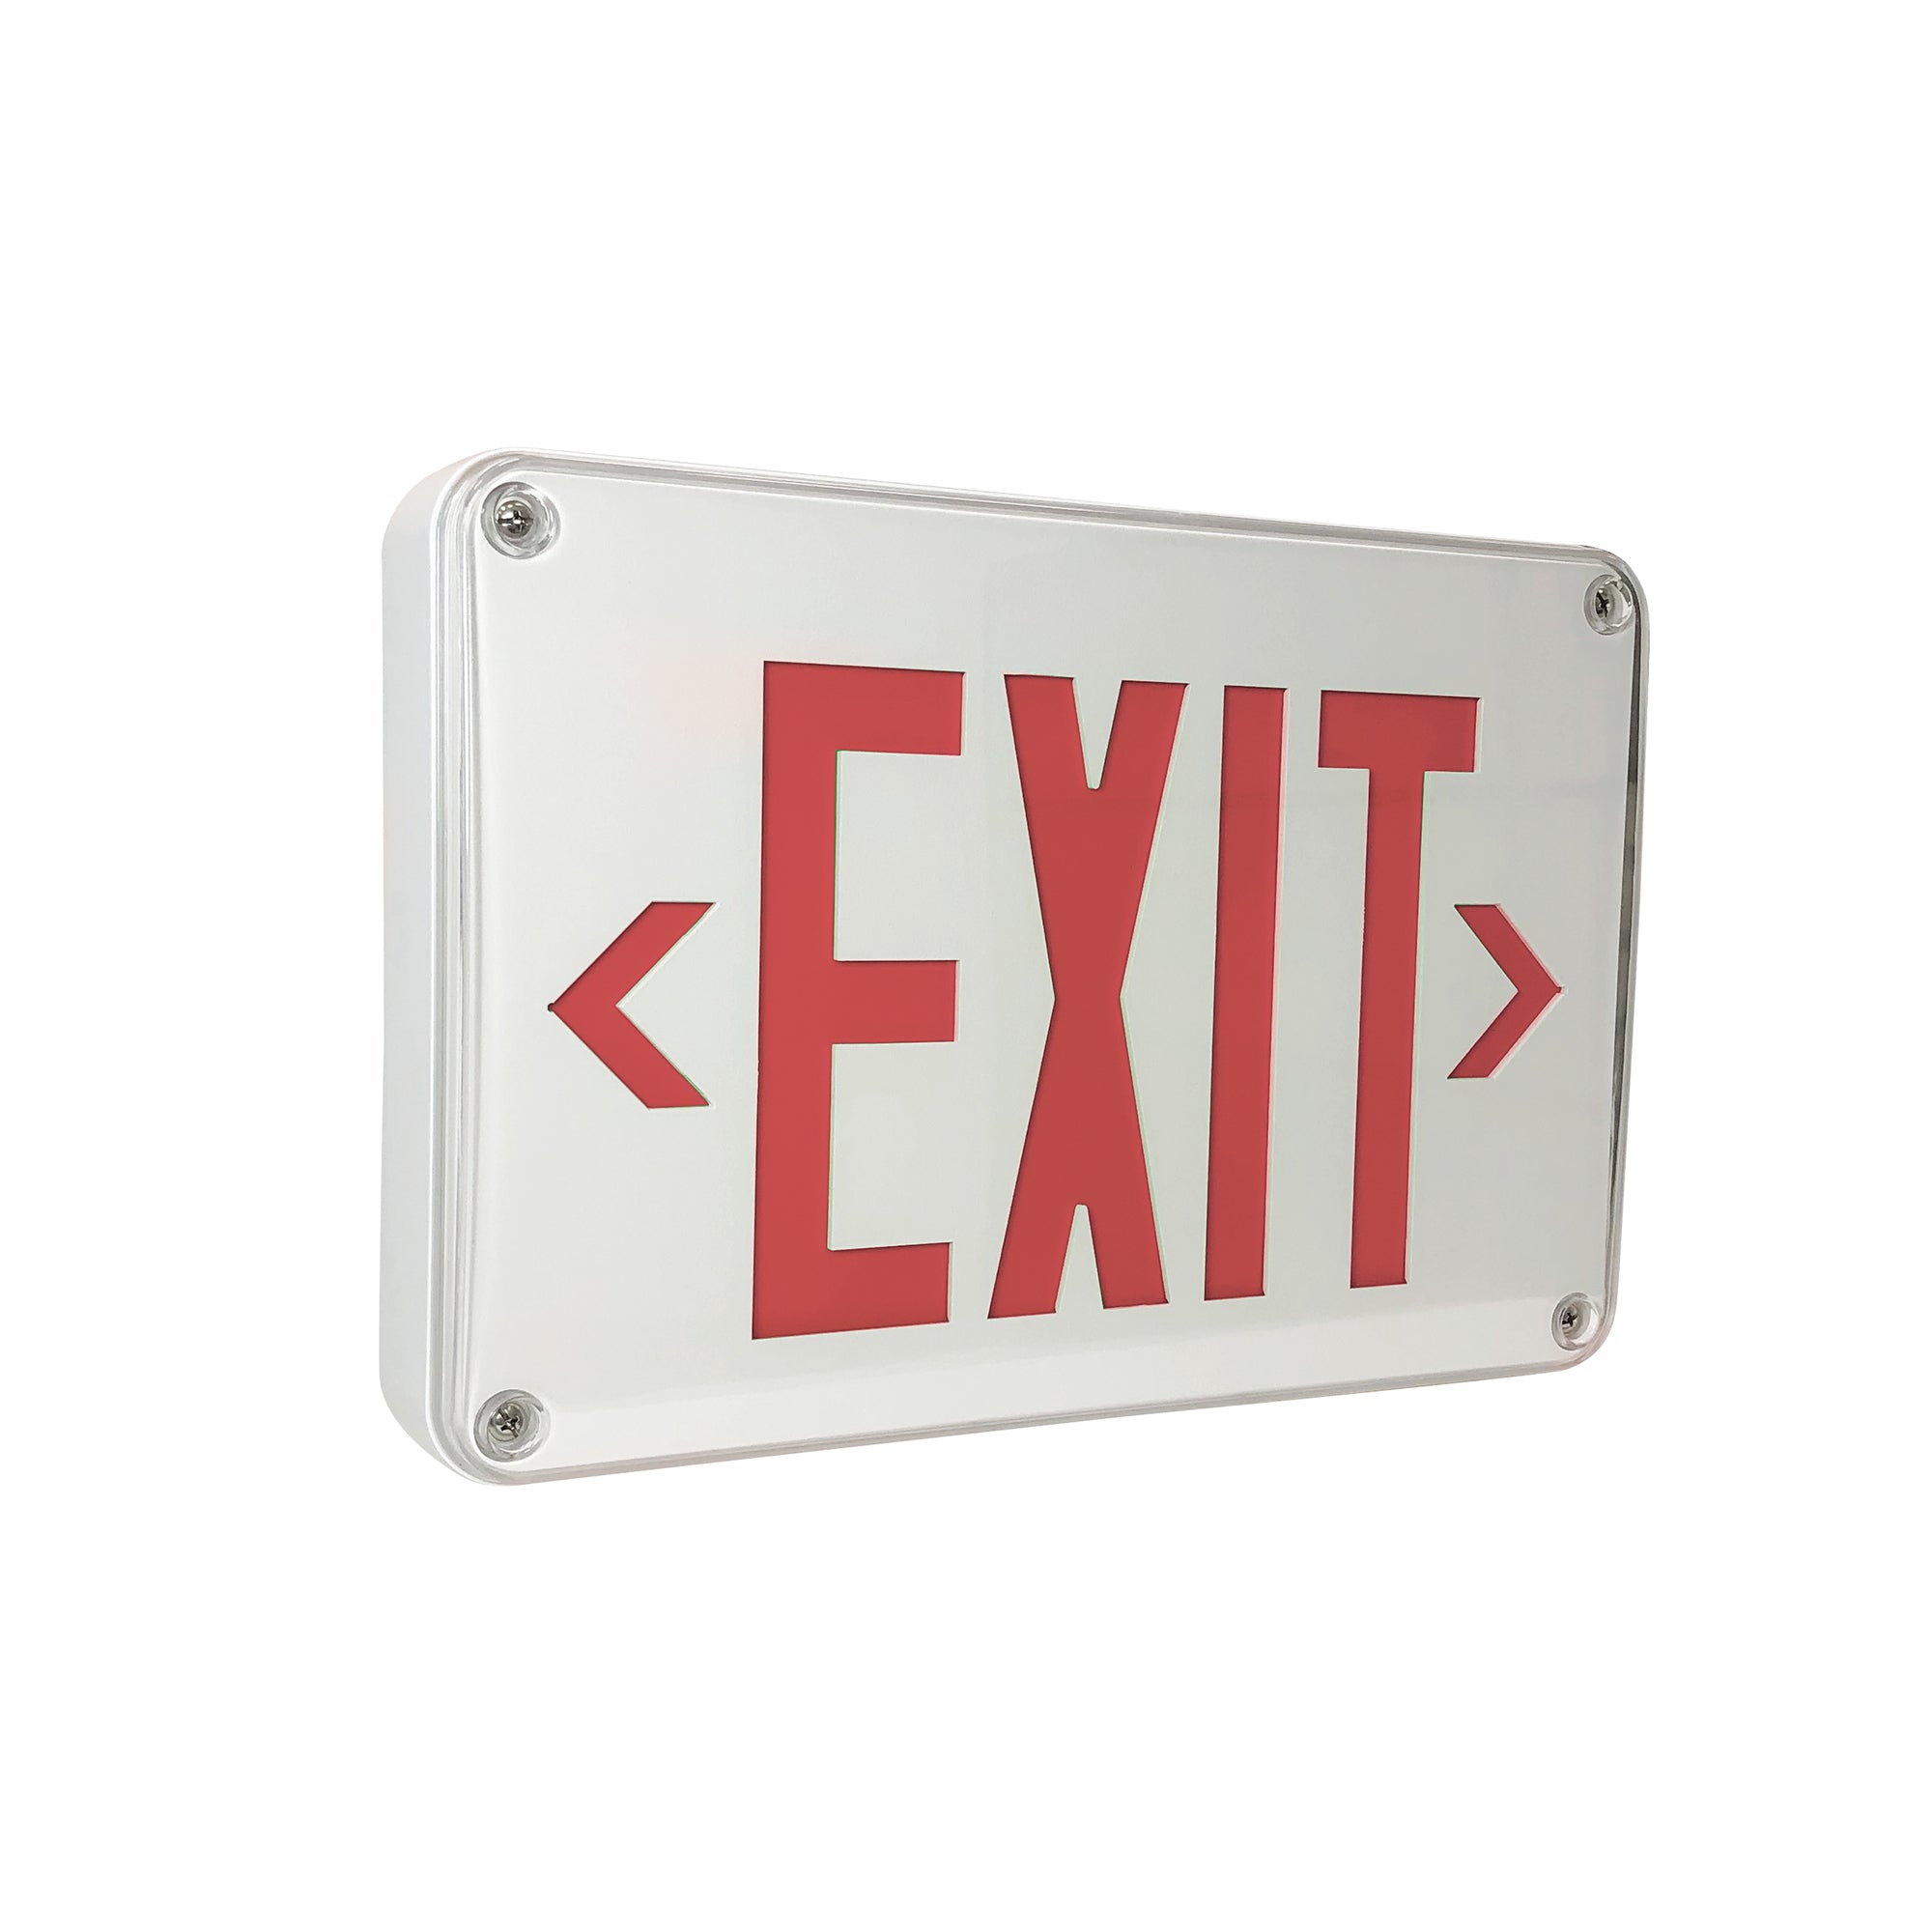 Nora Lighting NX-617-LED/R-CC - Exit / Emergency - LED Self-Diagnostic Wet/Cold Location Exit Sign w/ Battery Backup, White Housing w/ 6 Inch Red Letters